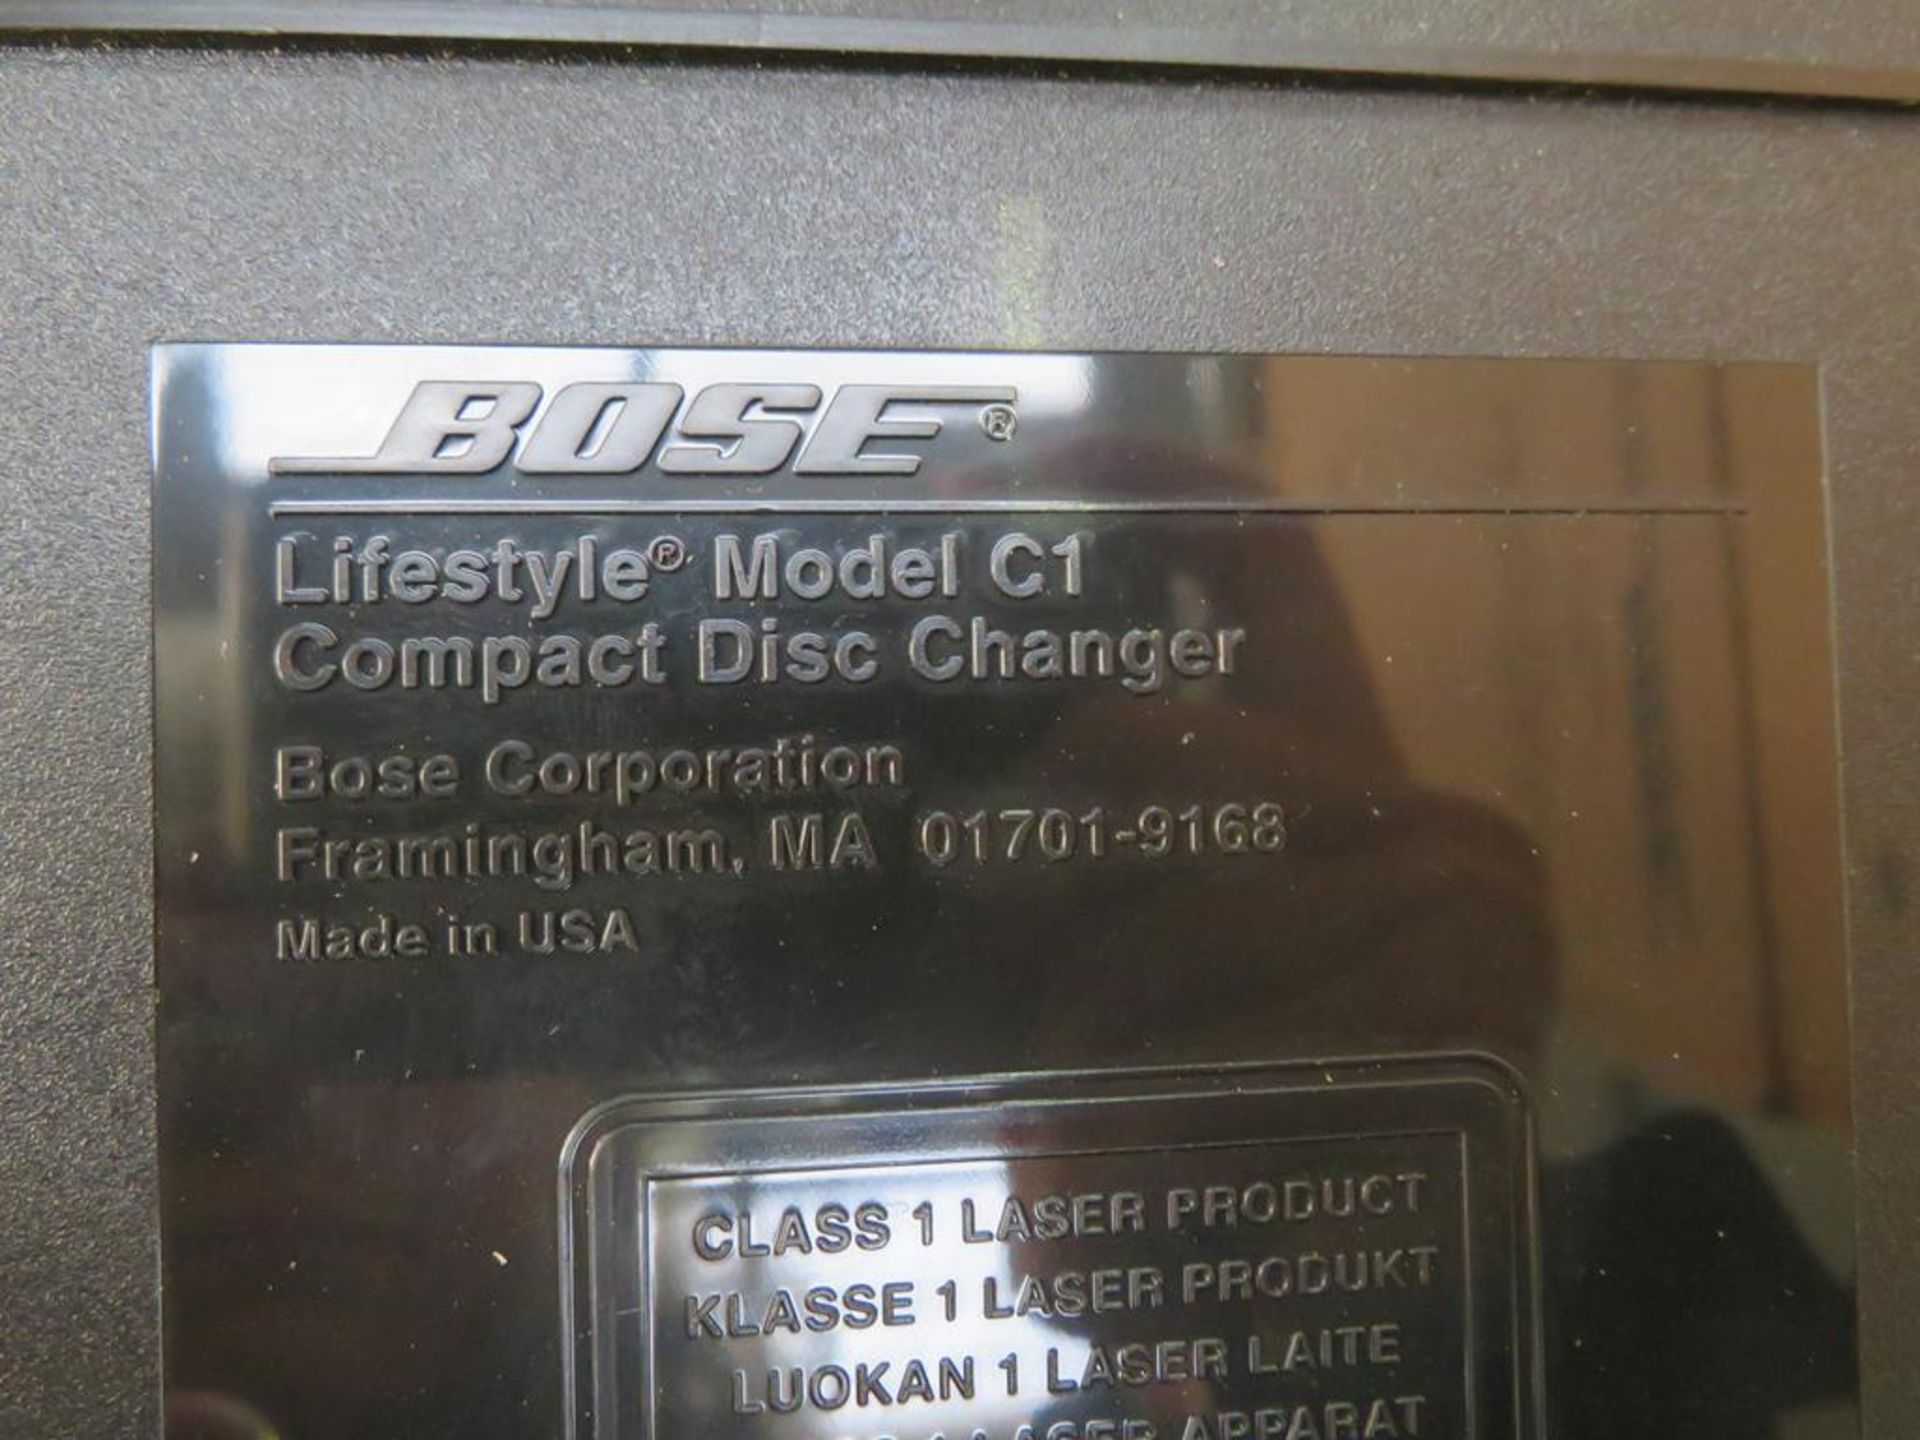 Bose Lifestyle Used Compact Disc Changer - Image 5 of 5